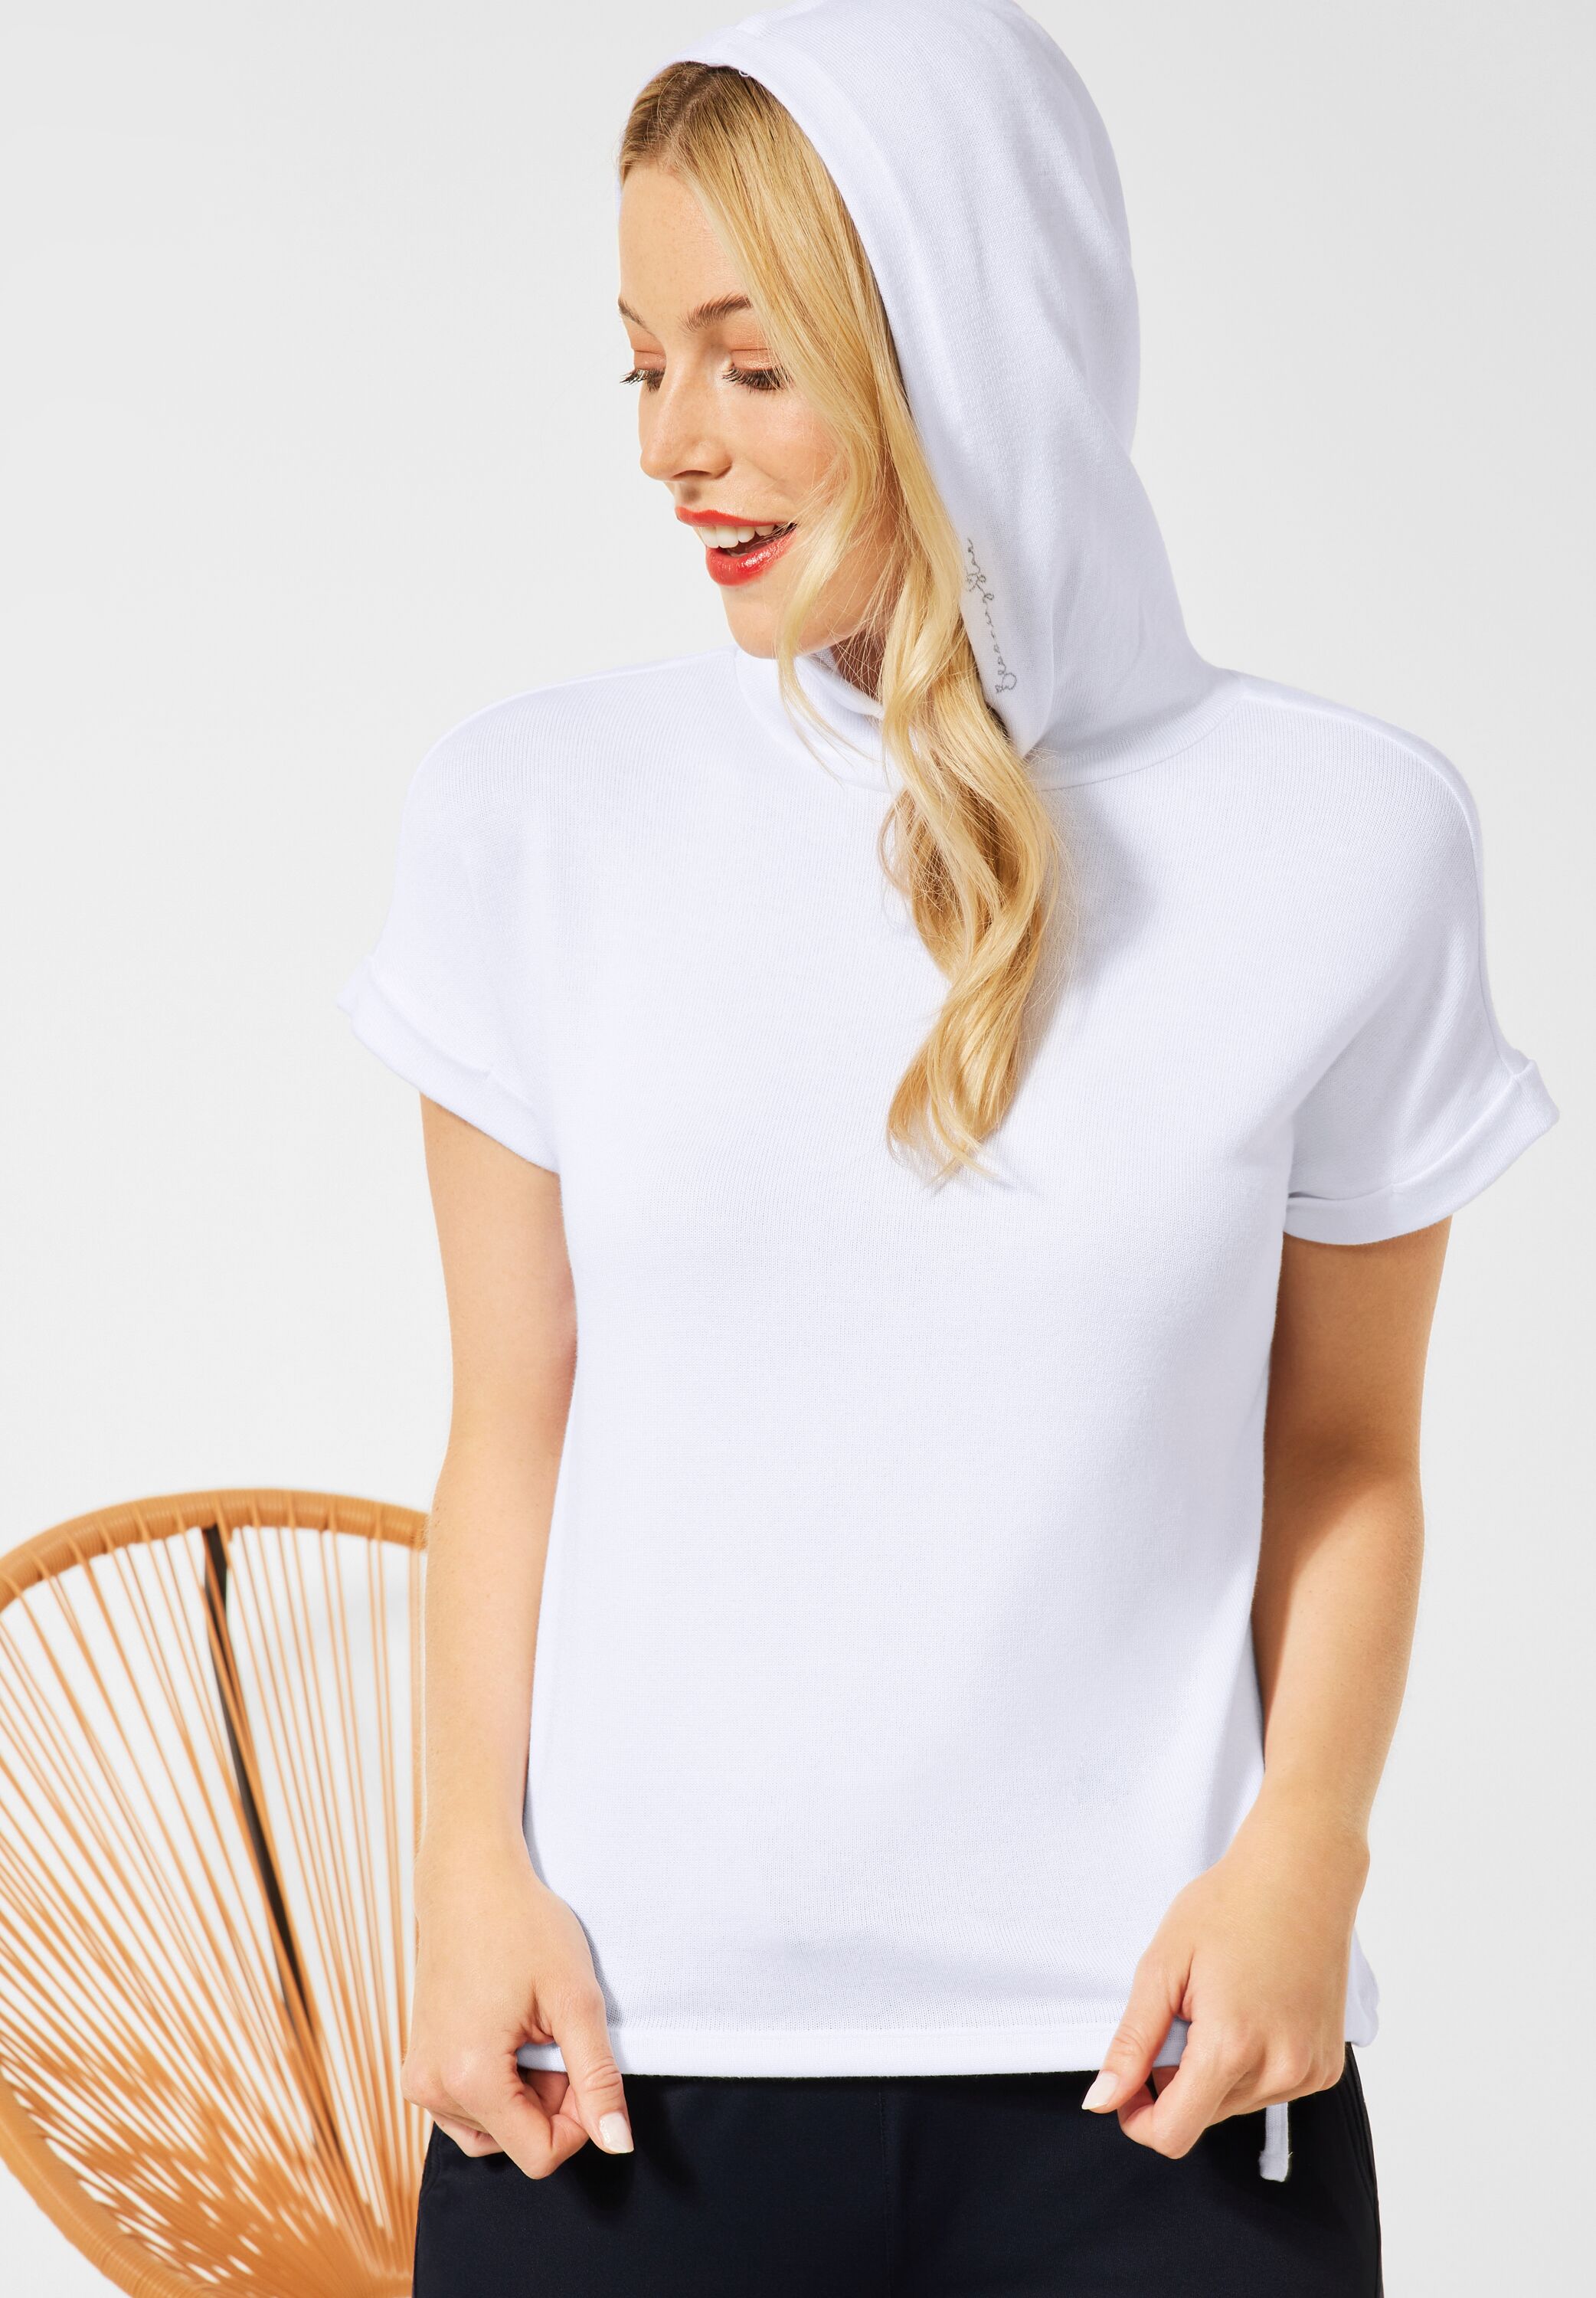 One Mode Street in CONCEPT - A316625-10000 White T-Shirt